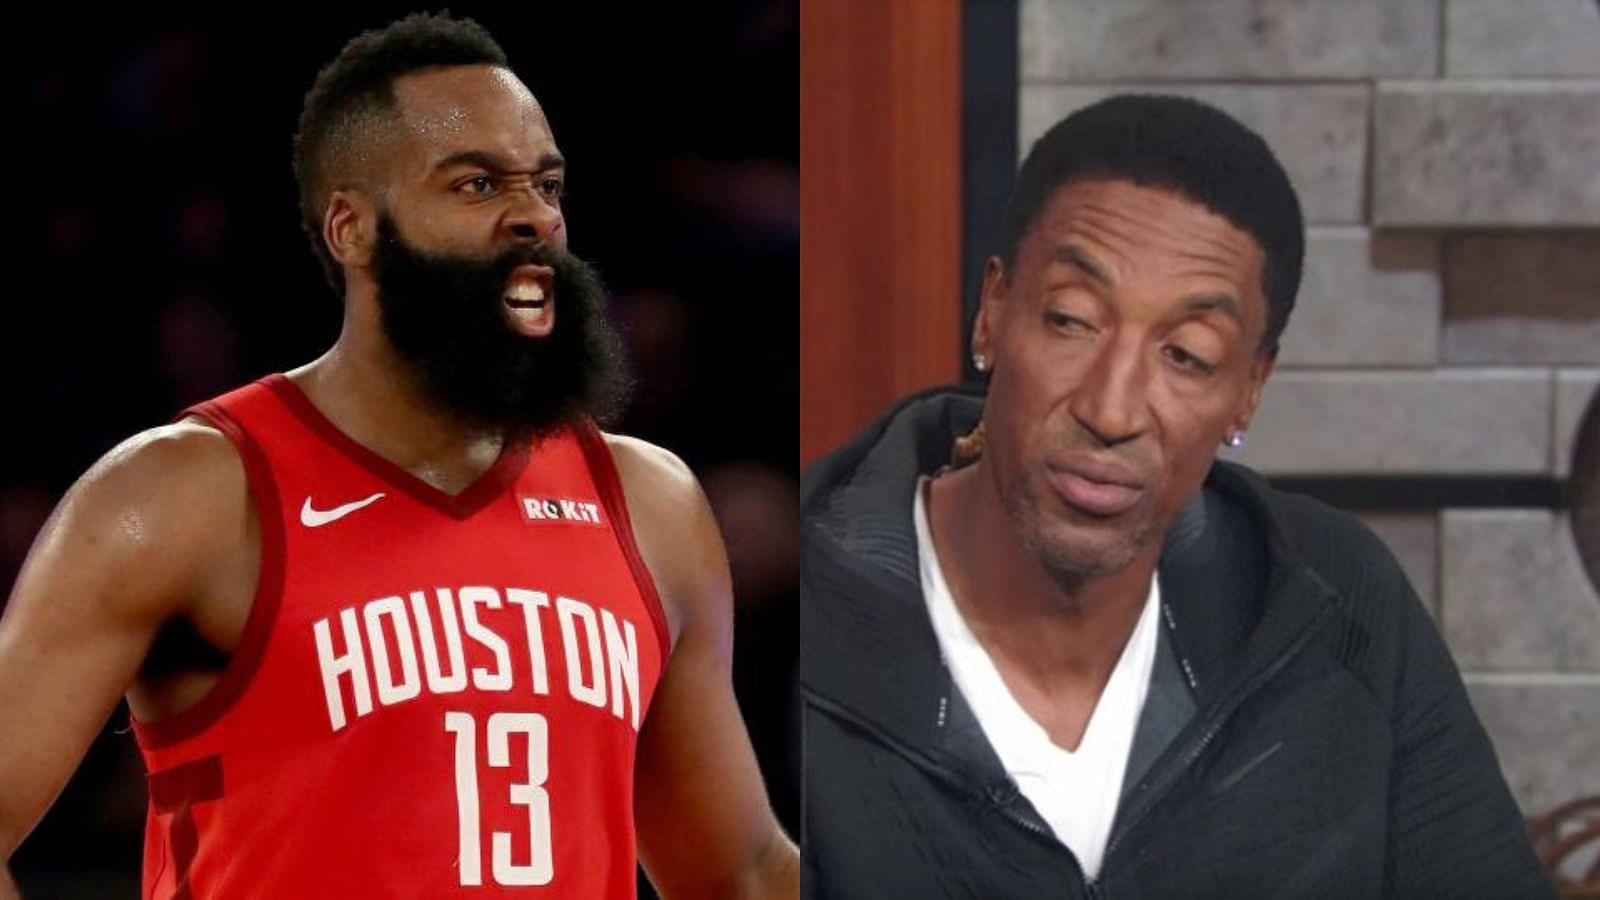 “Only way you stop a guy like James Harden is with the team”: Scottie Pippen gave his views on how to stop the 2018 MVP when he was wreaking havoc